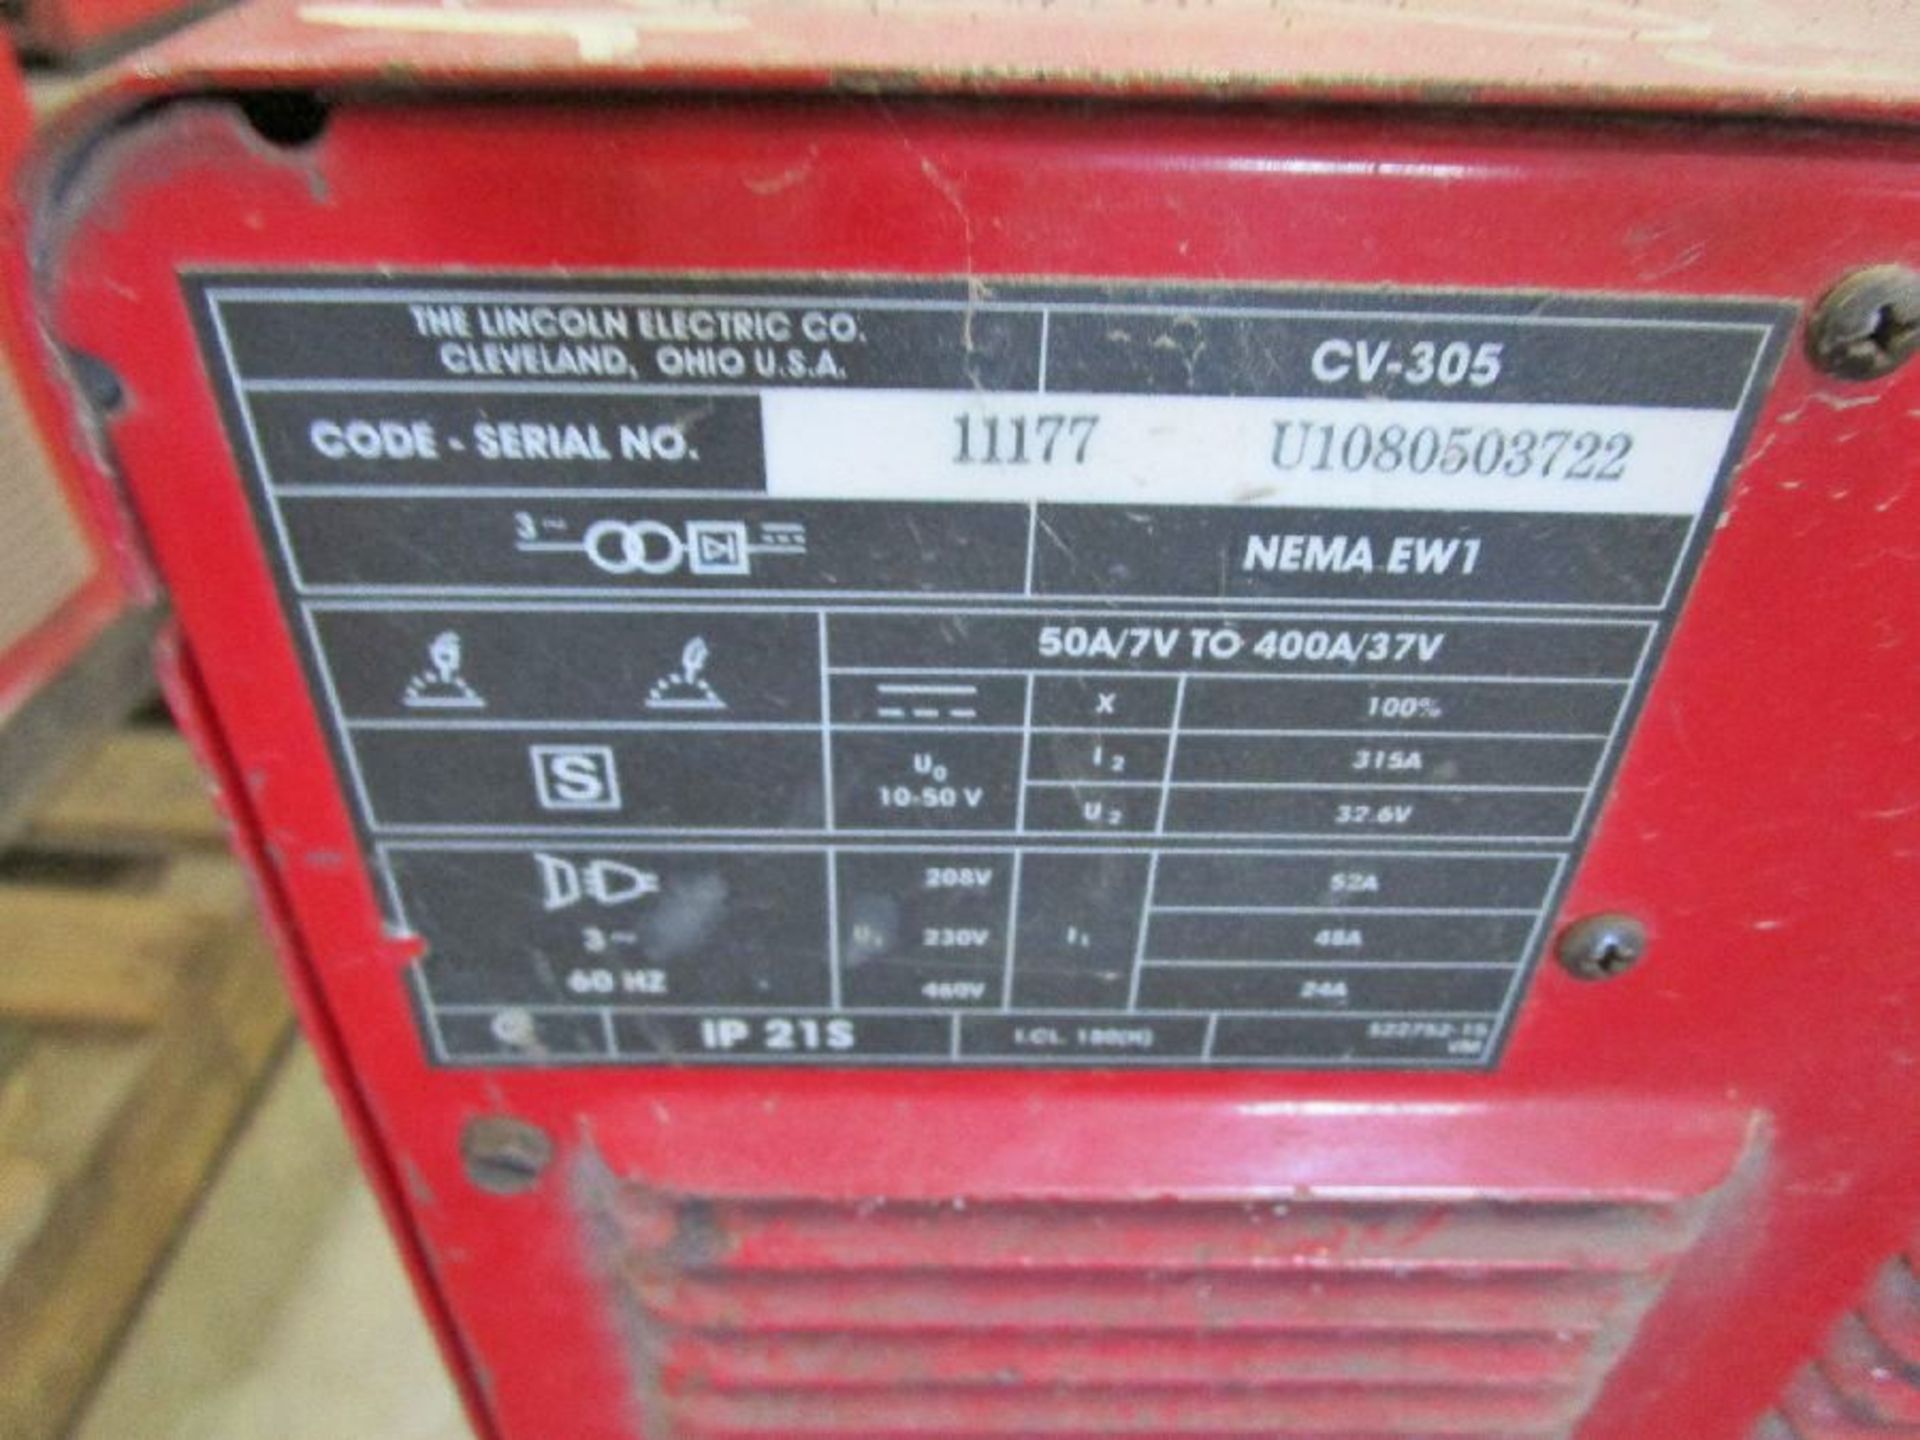 Lincoln Electric Model CV - 305 Mig Welding Power Source - Image 11 of 12